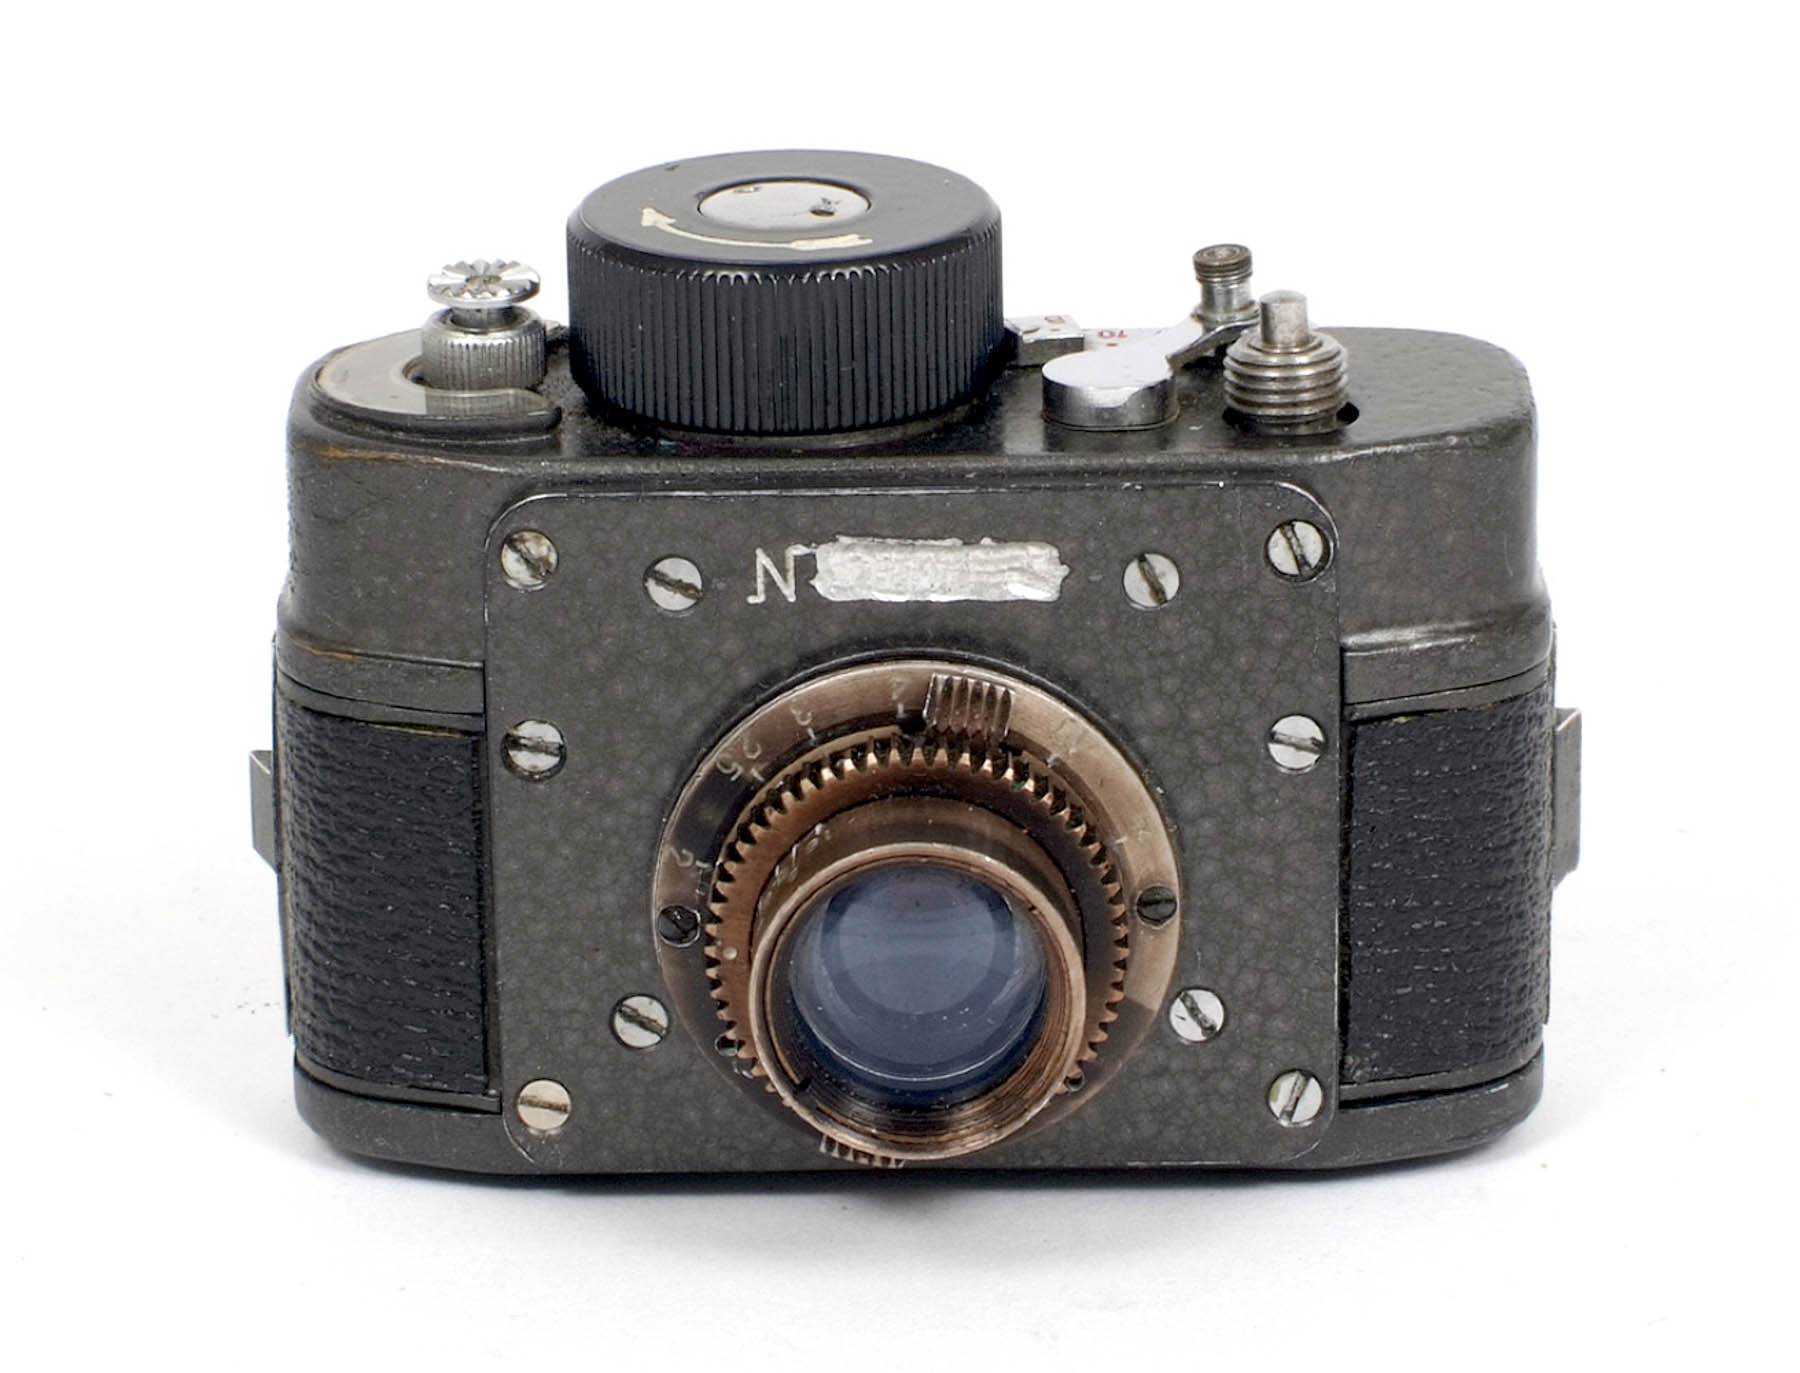 Soviet Spy-Camera Auction Will Let You Channel Your Inner 007 - Bloomberg